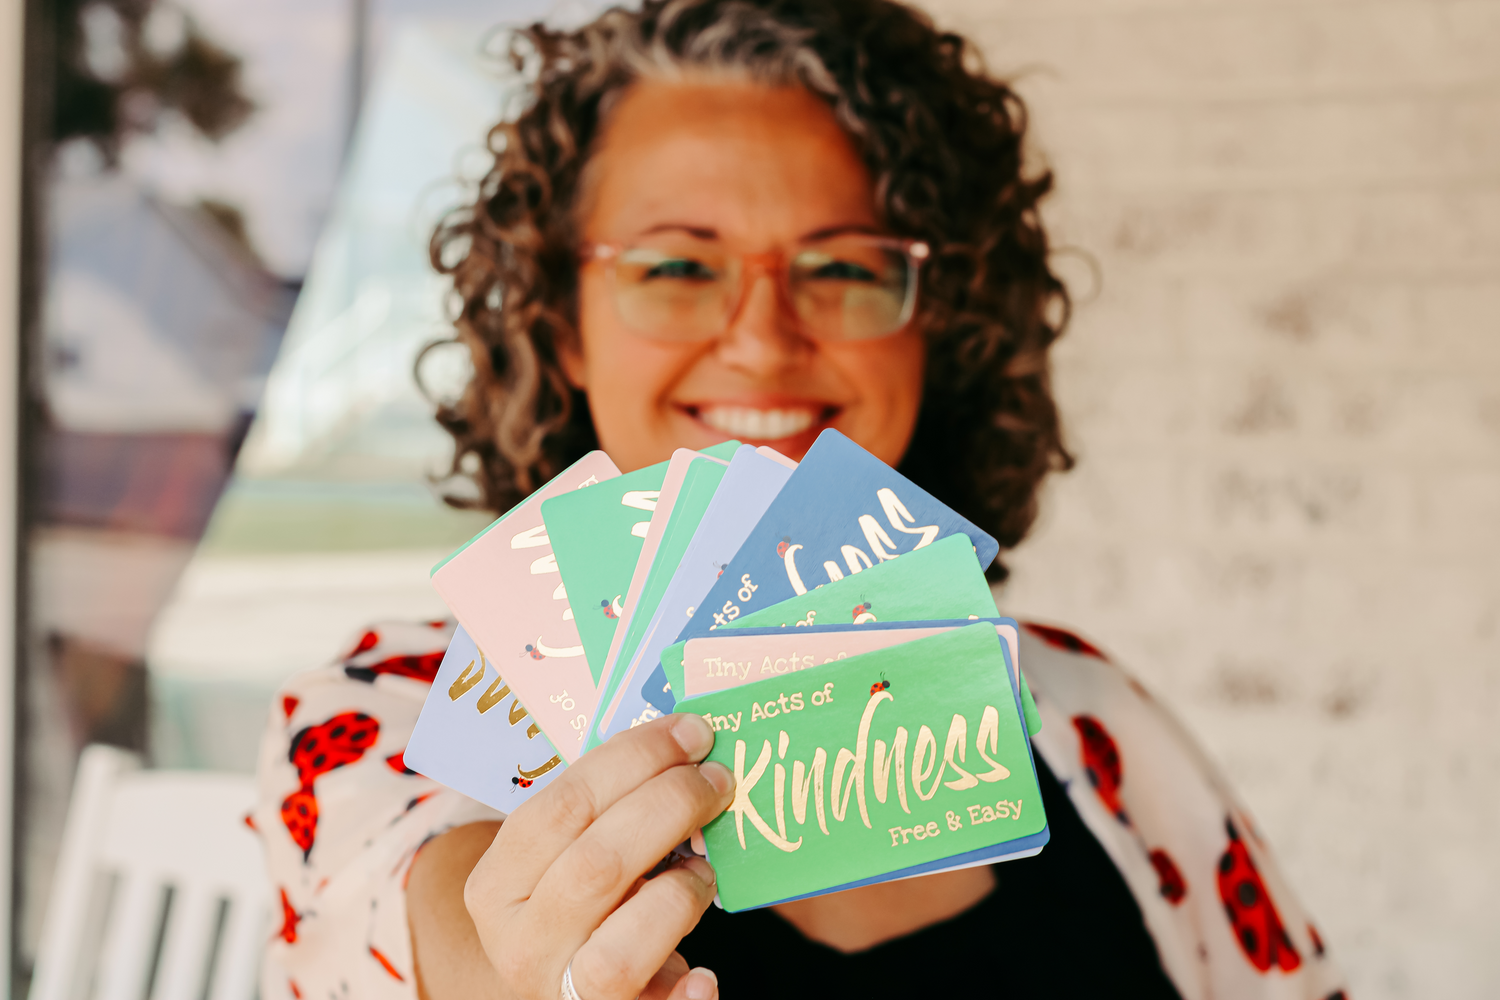 Gina Sachs, Creator of Kindness at tinyacts.co holding kindness cards